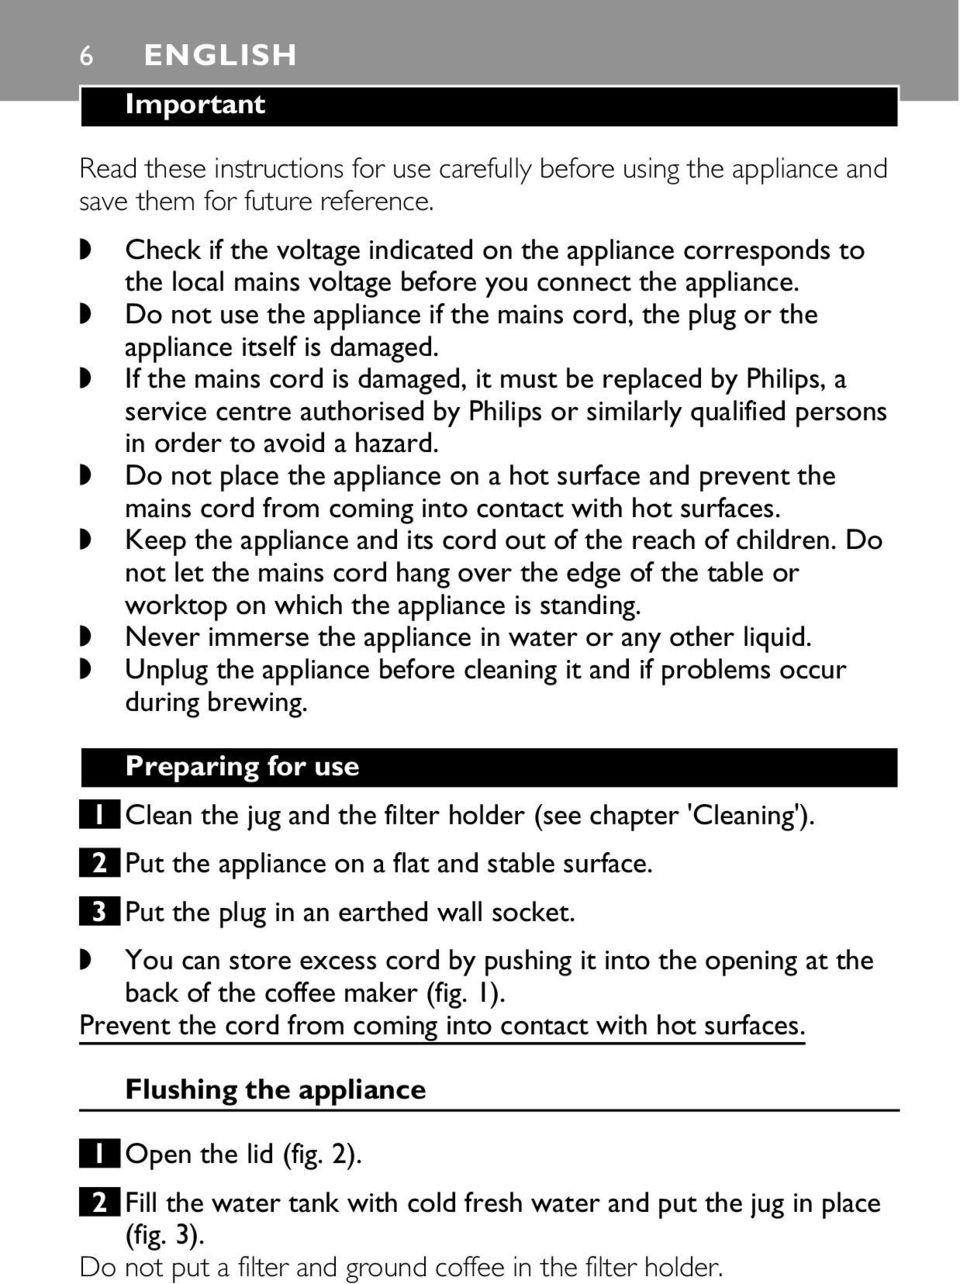 Do not use the appliance if the mains cord, the plug or the appliance itself is damaged.